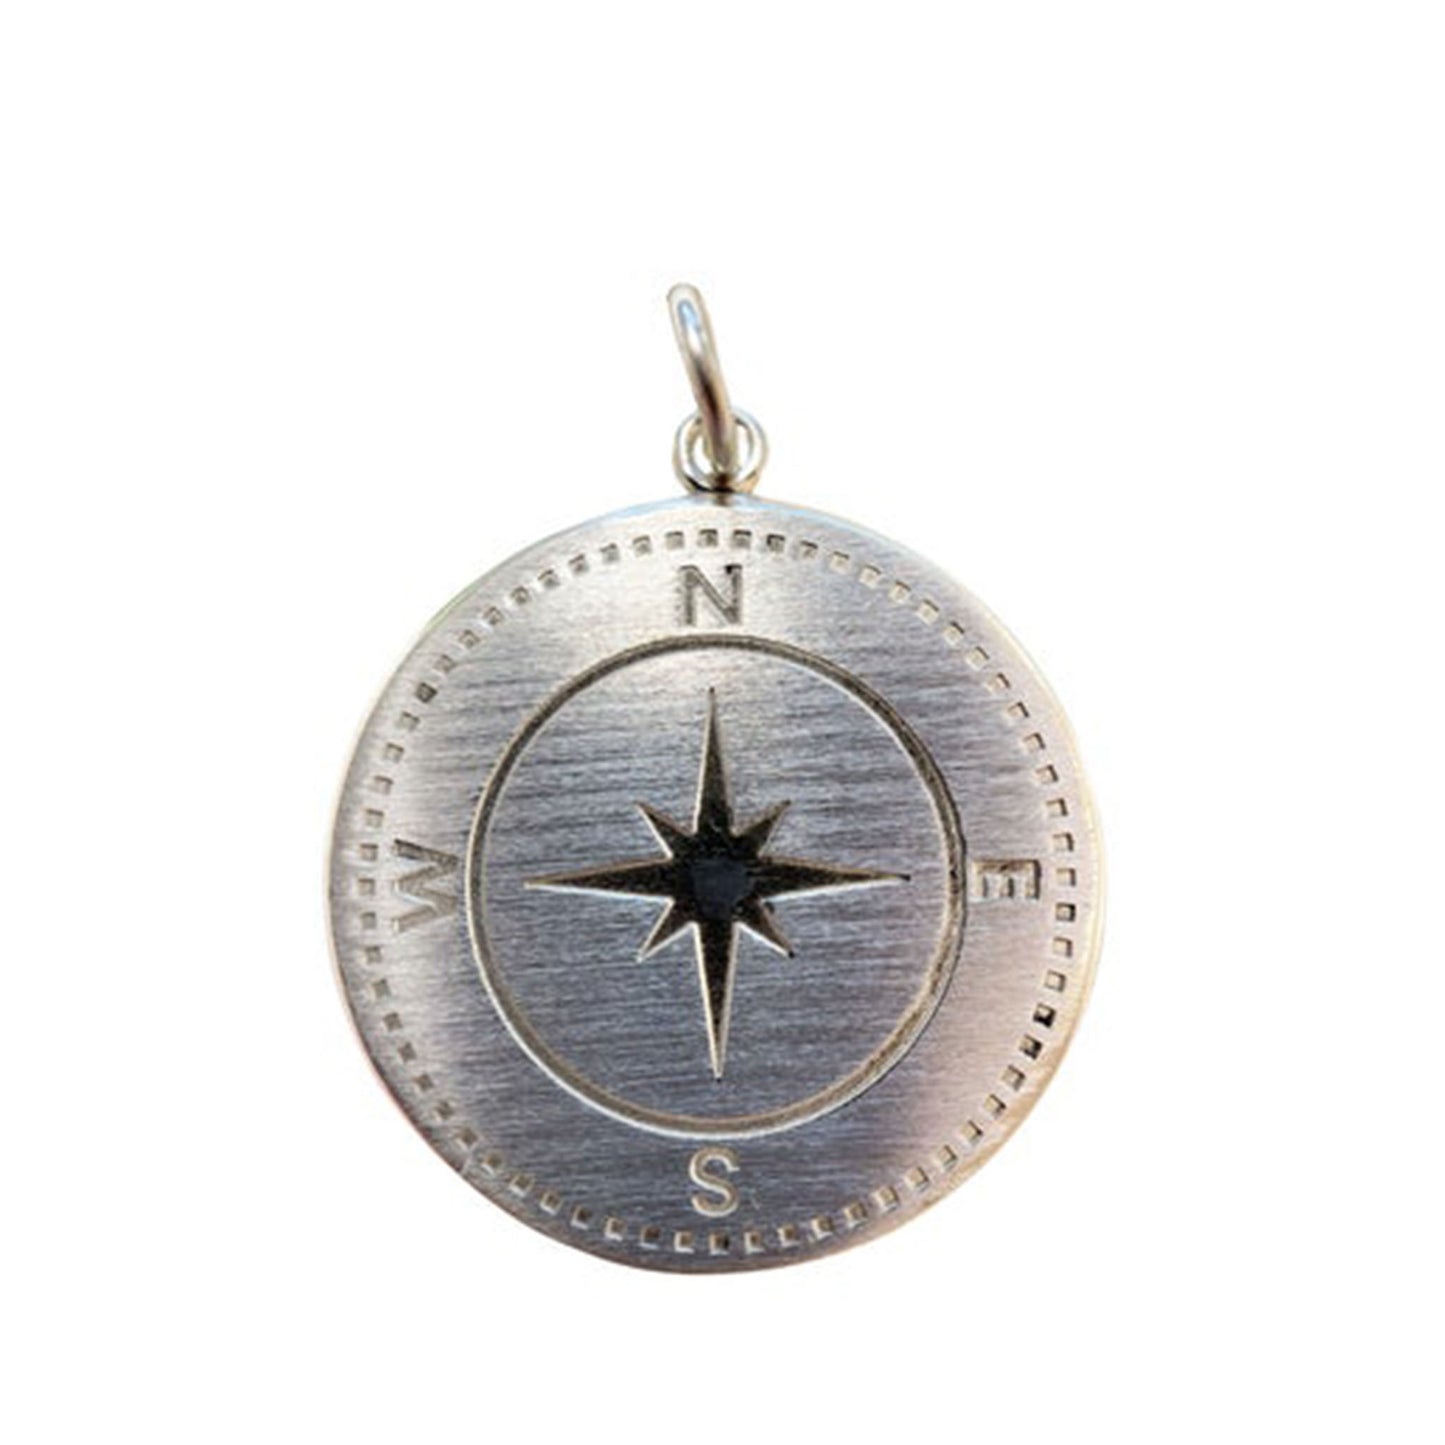 Nantucket Compass Pendant in Sterling